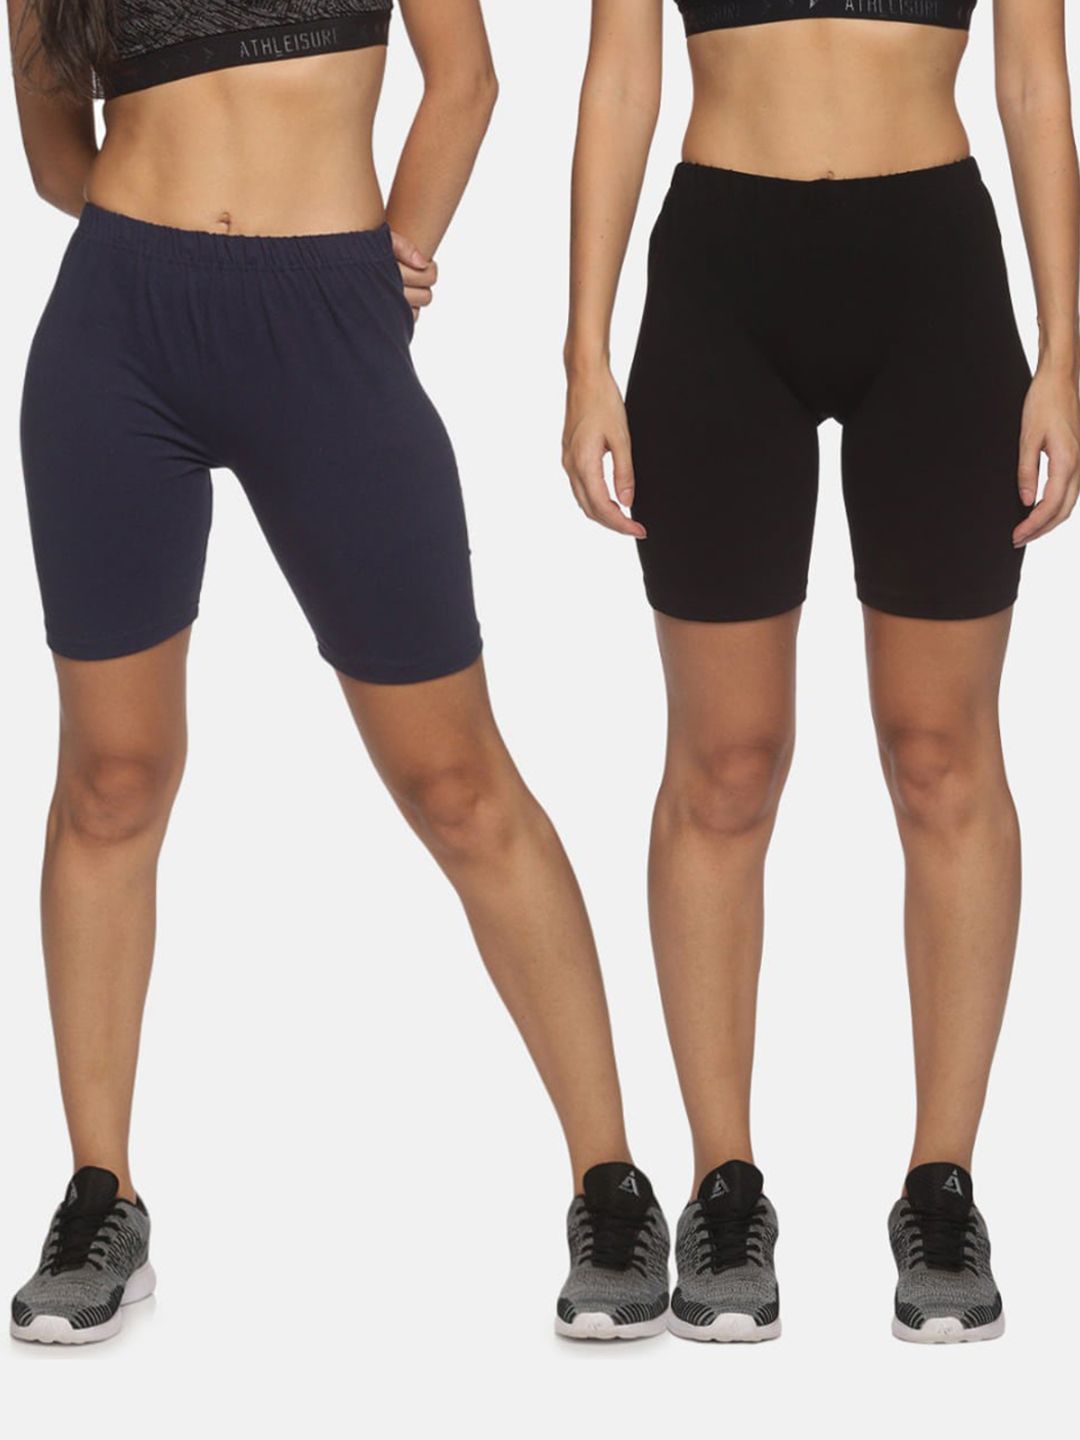 NOT YET by us Women Black & Navy Blue Set Of 2 Slim Fit Outdoor Sports Shorts Price in India